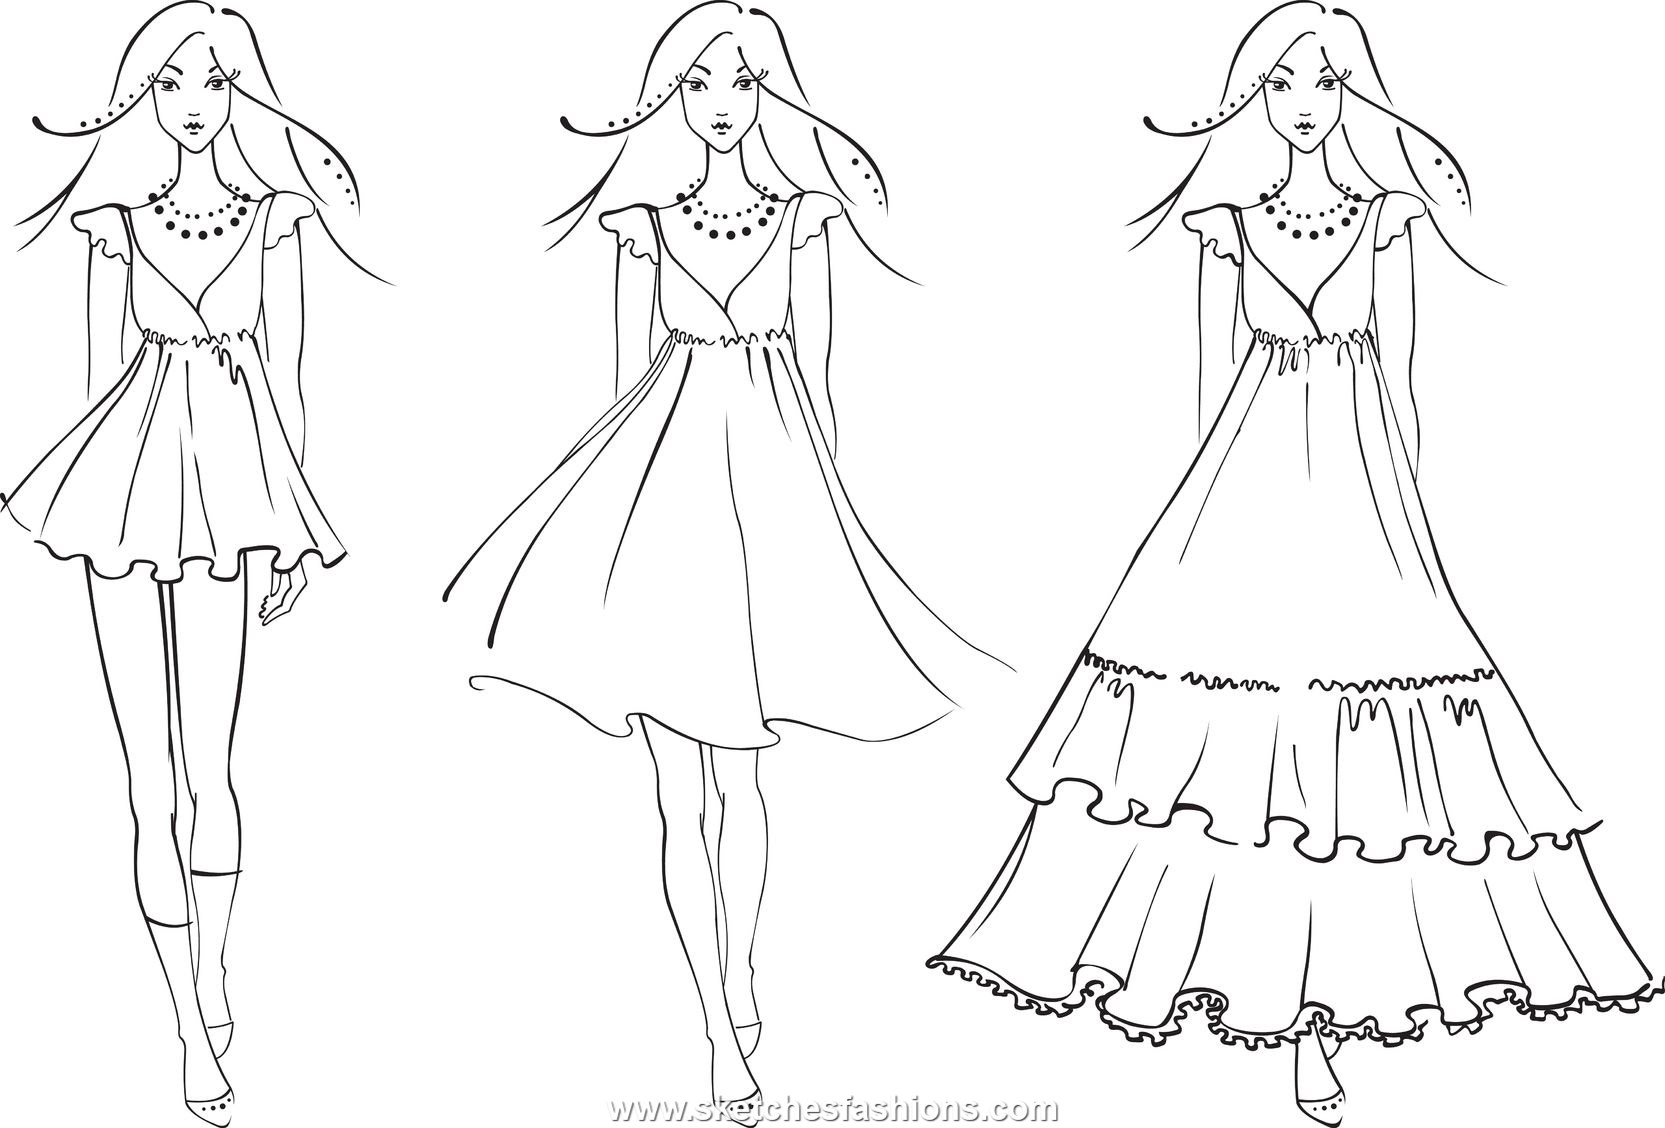 Fashion Design Sketches of Dresses - Get Coloring Pages